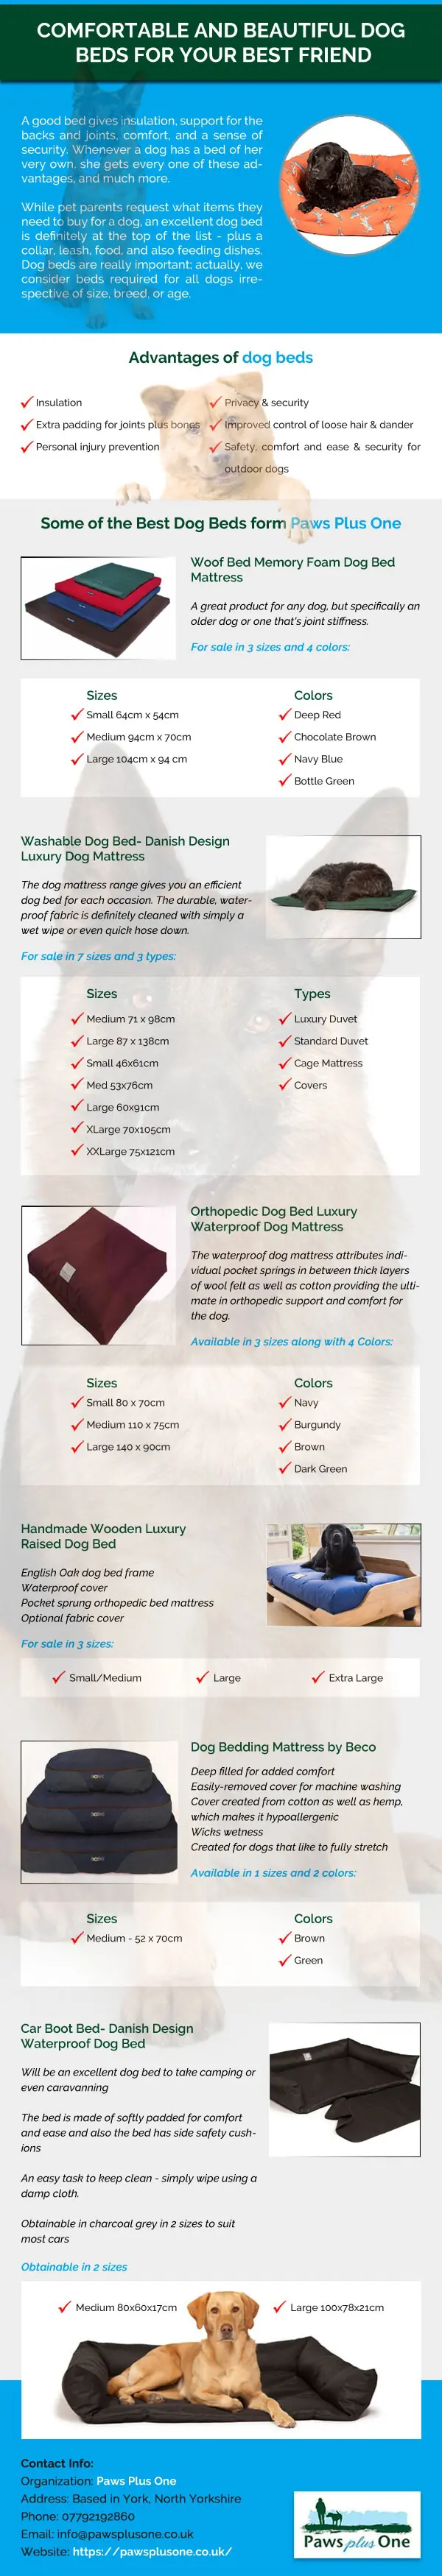 Comfortable and Beautiful Dog Beds